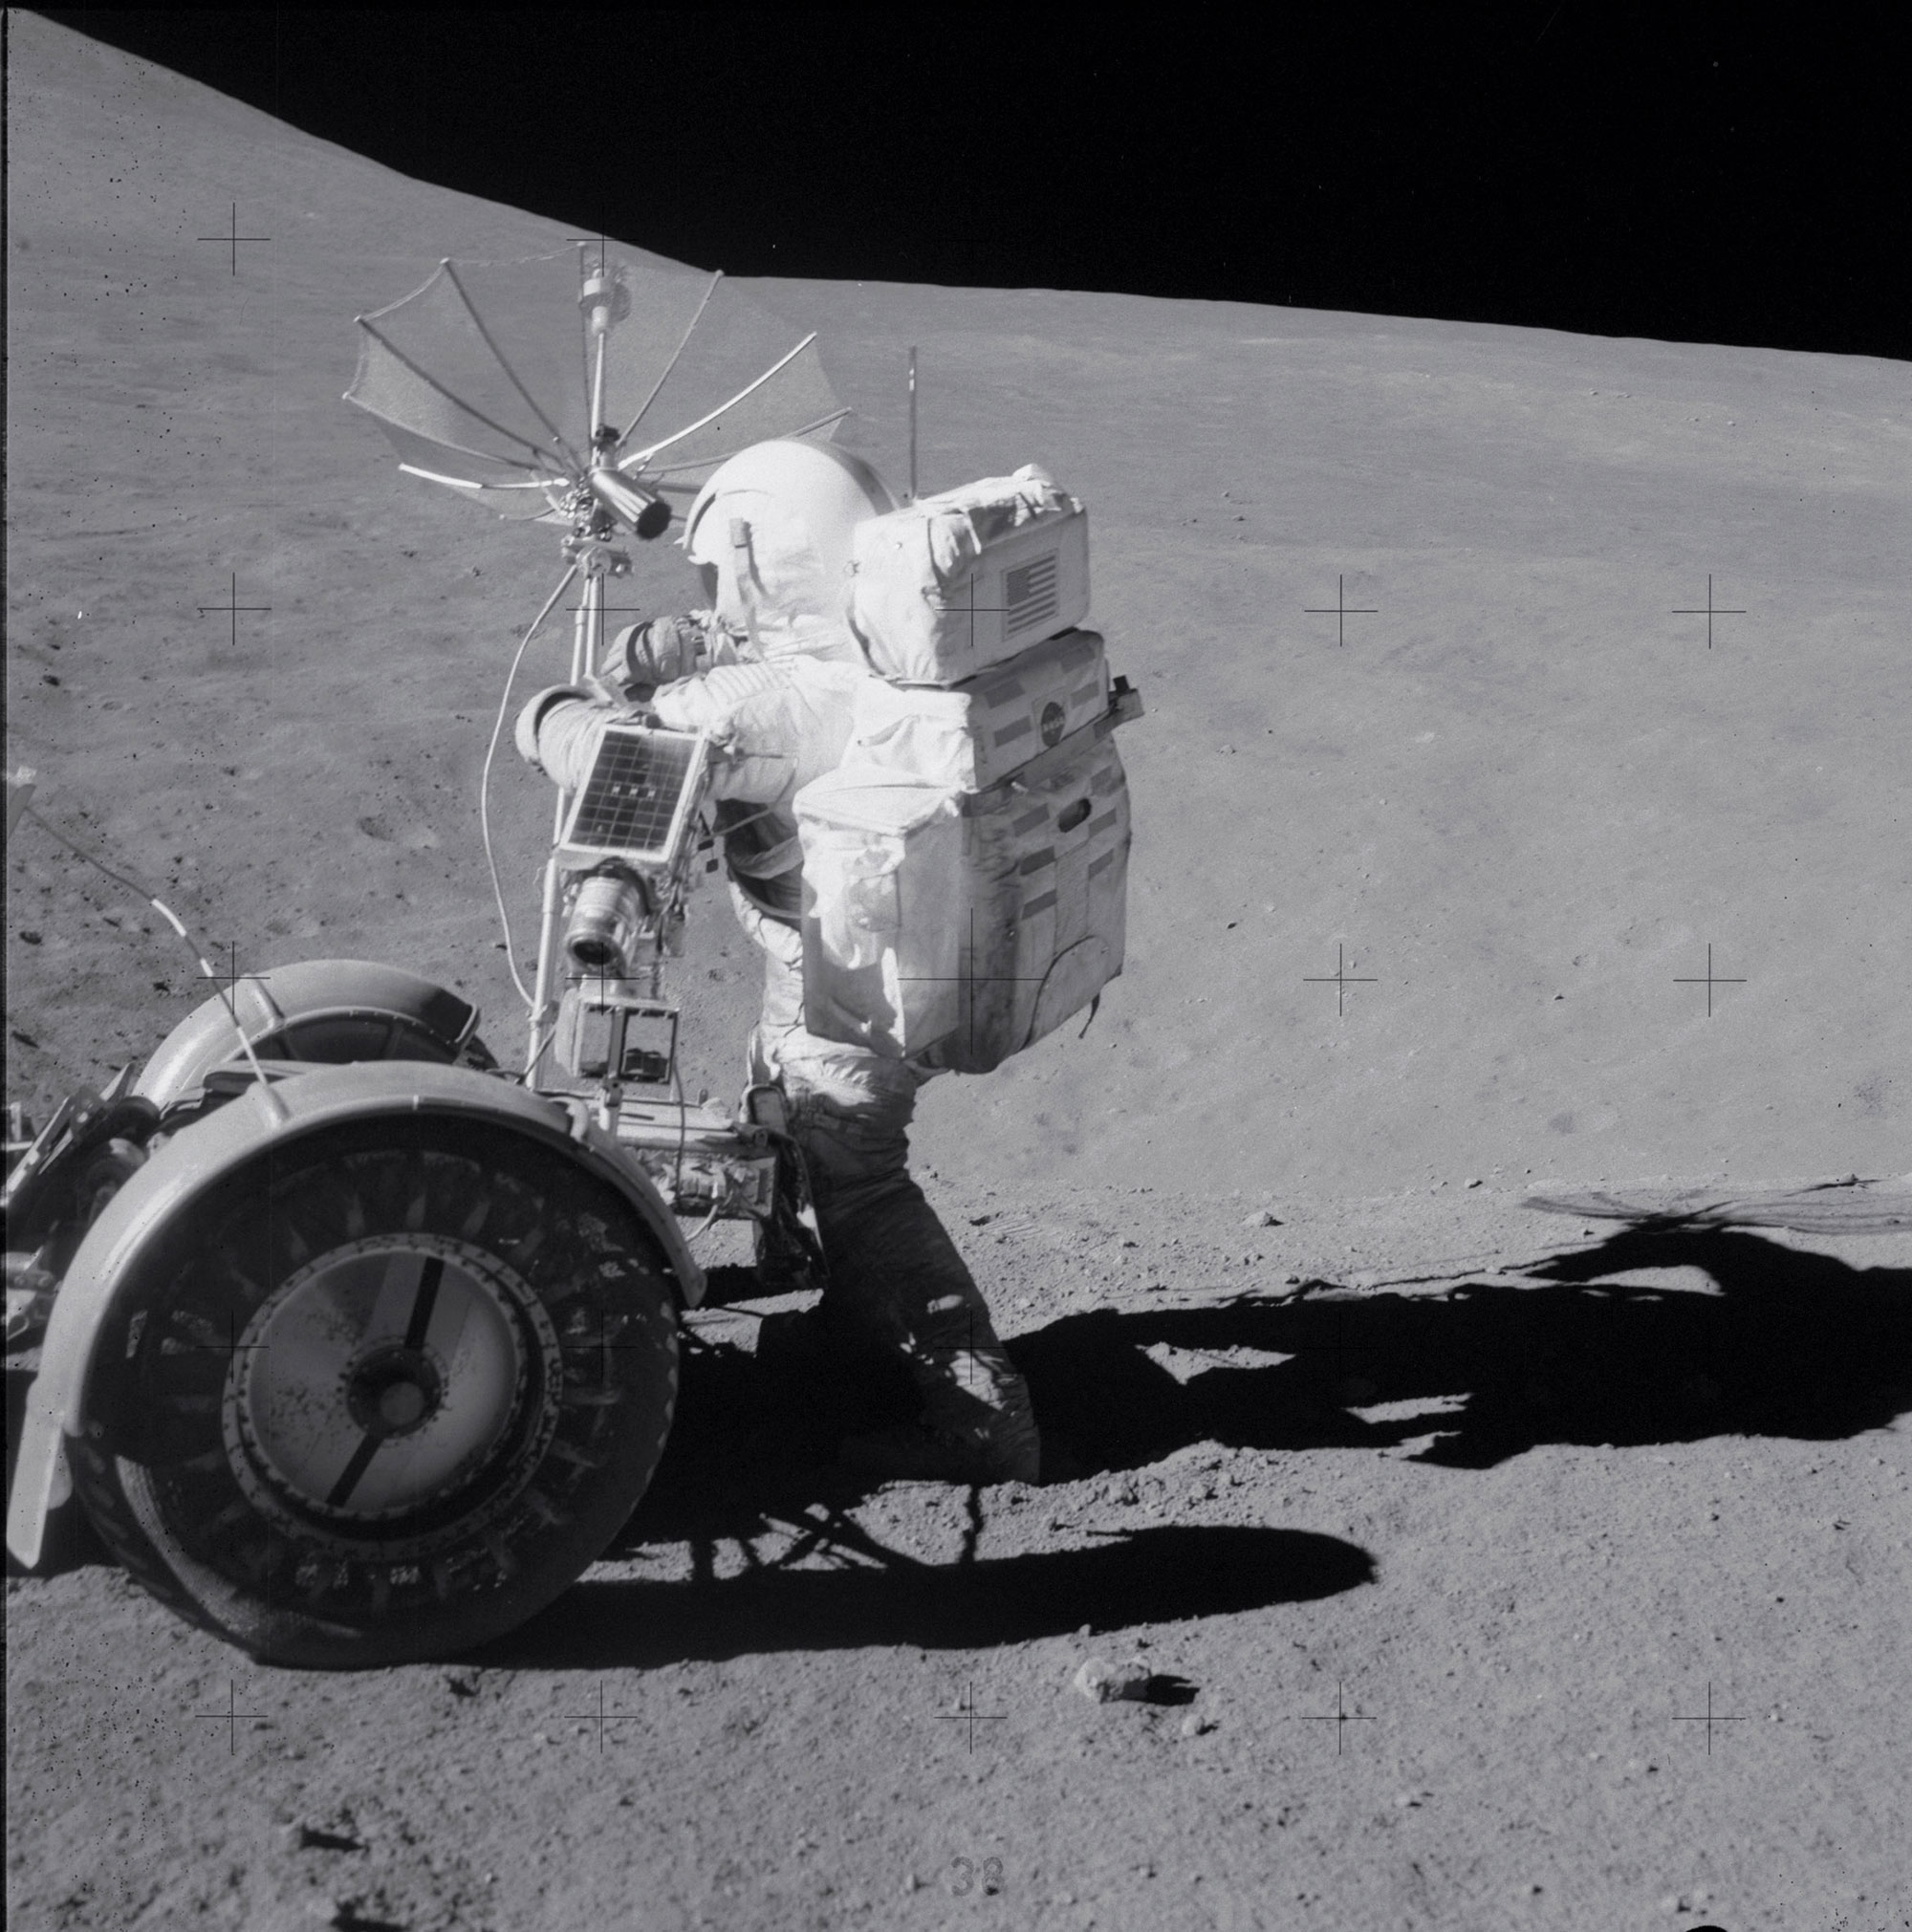 Working at Spur Crater during the second EVA. Credit: NASA via Retro Space Images